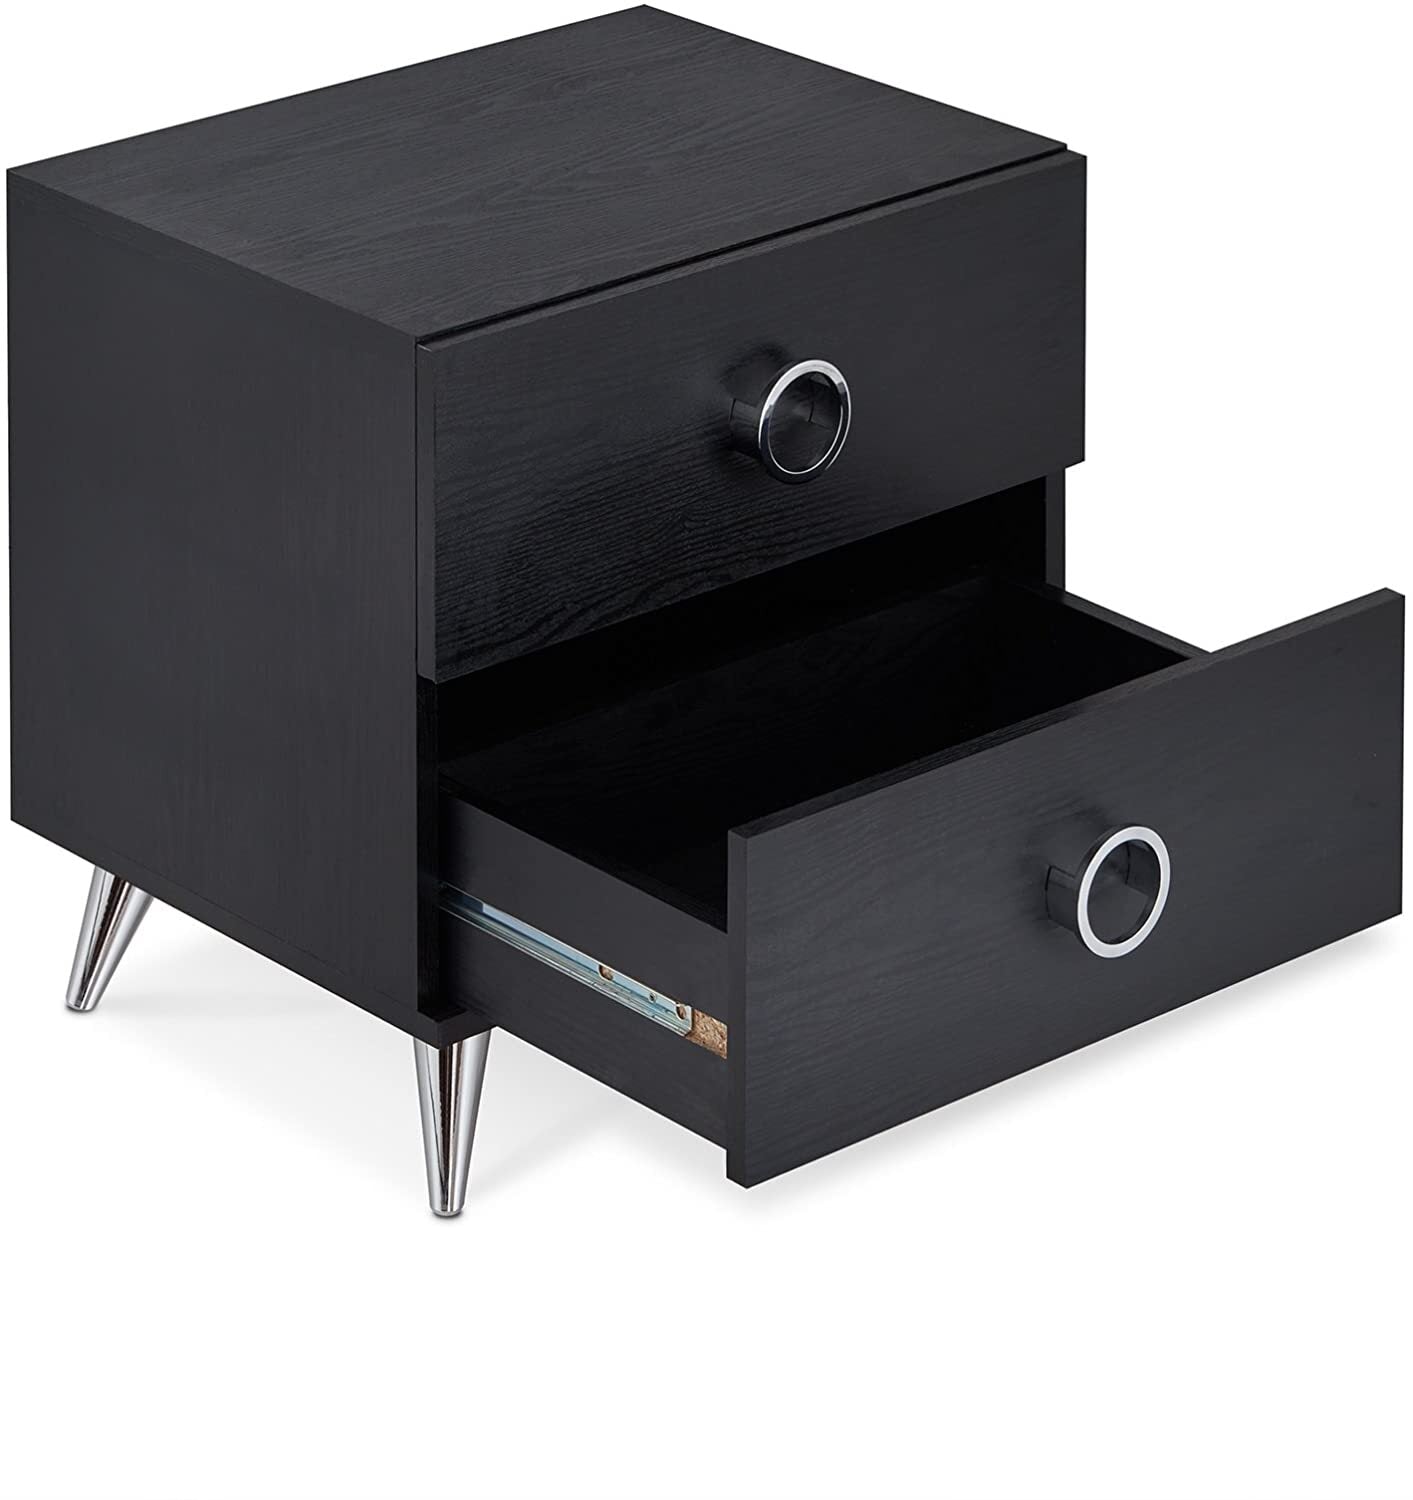 20" Black Two Drawers Chrome Nightstand